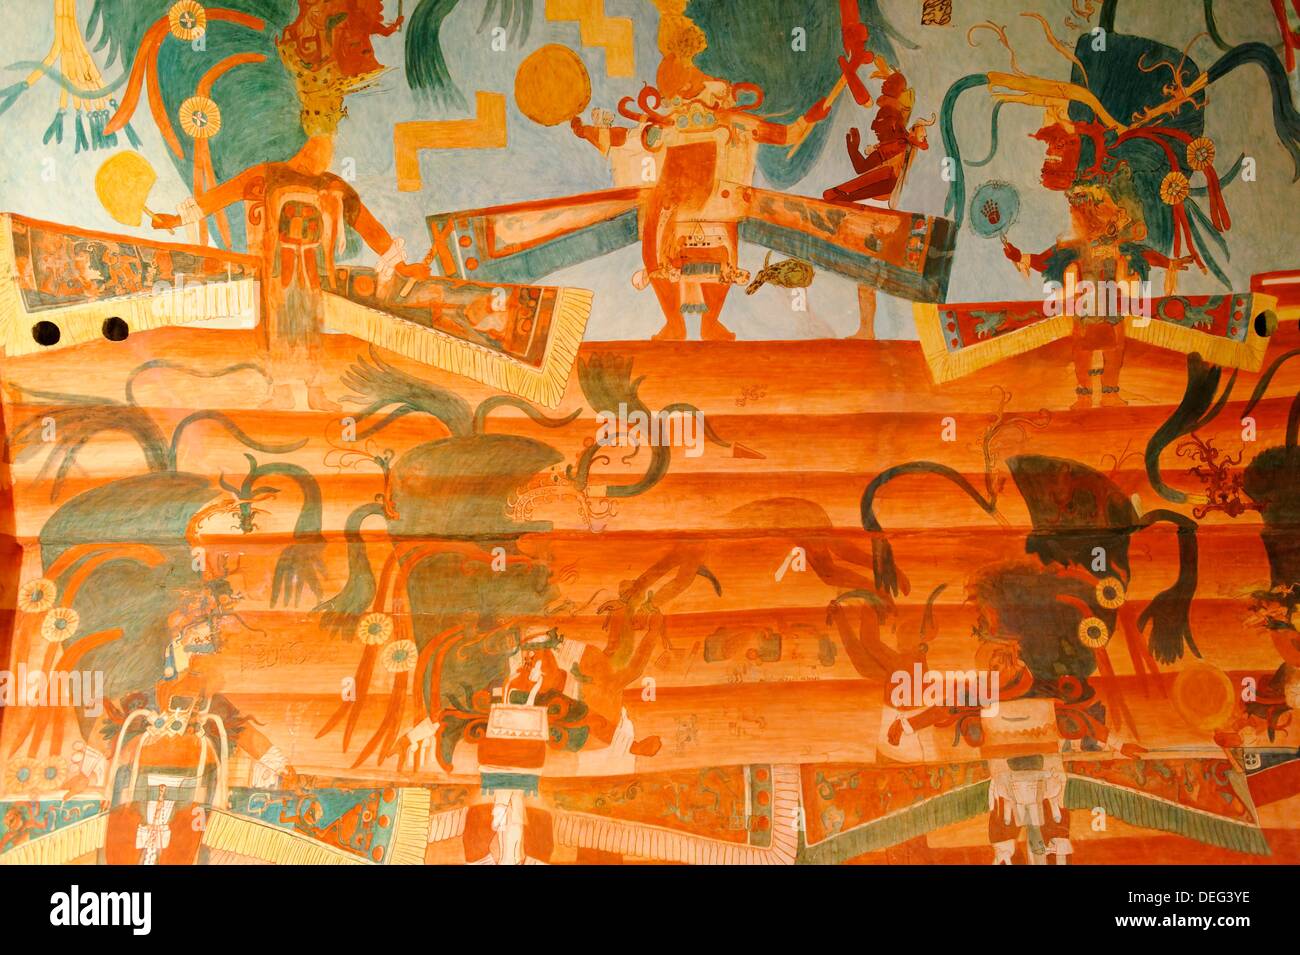 Reproductions of Murals from Bonampak, an ancient Maya archaeological site in the Mexican state of Chiapas. The National Museum Stock Photo